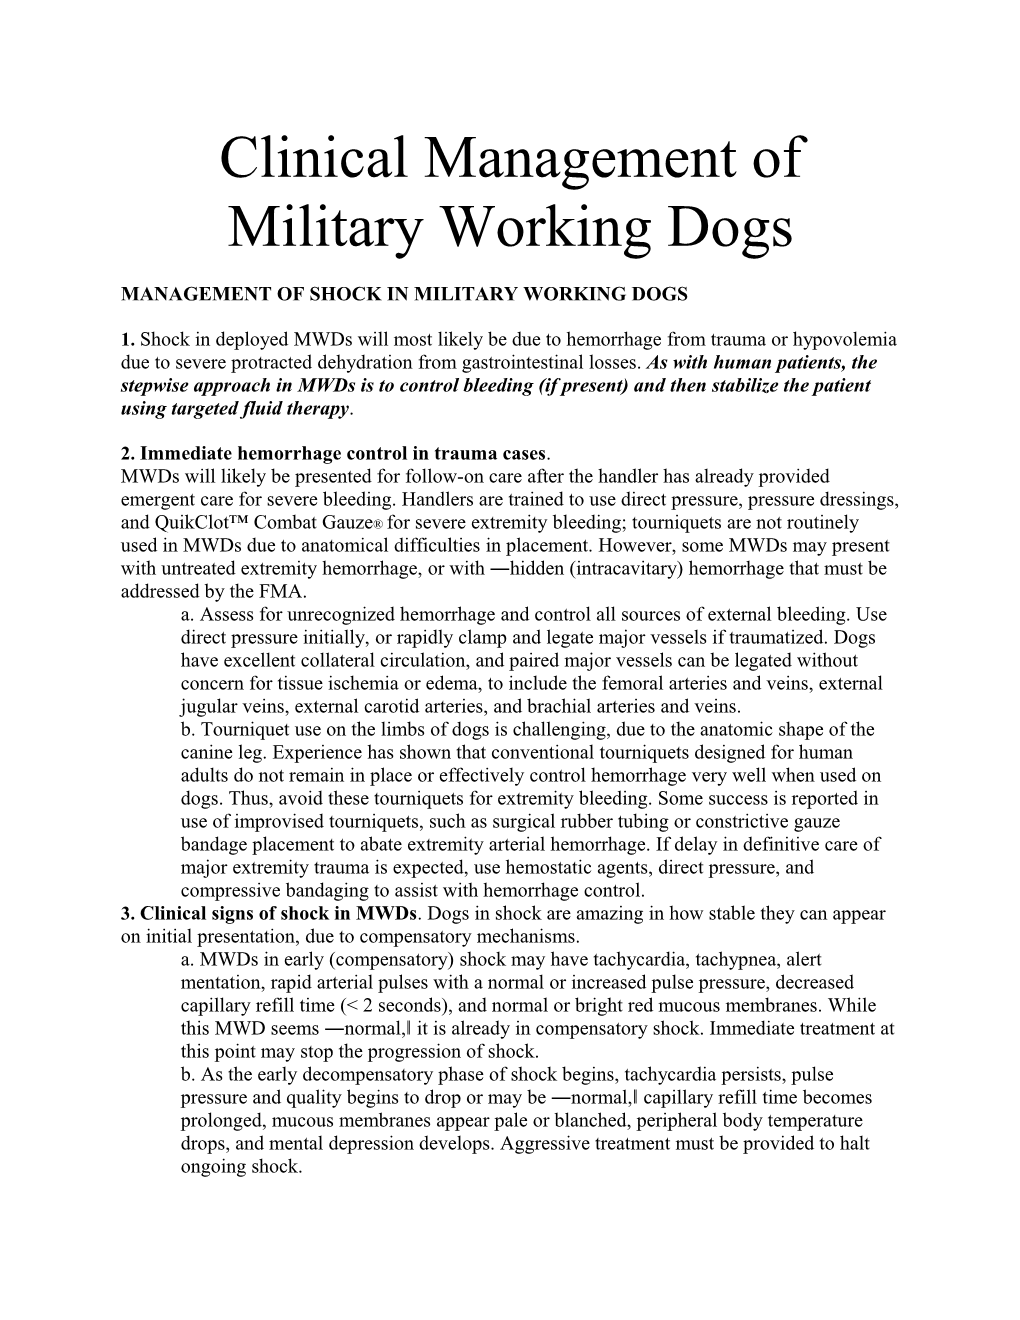 Management of Shock in Military Working Dogs